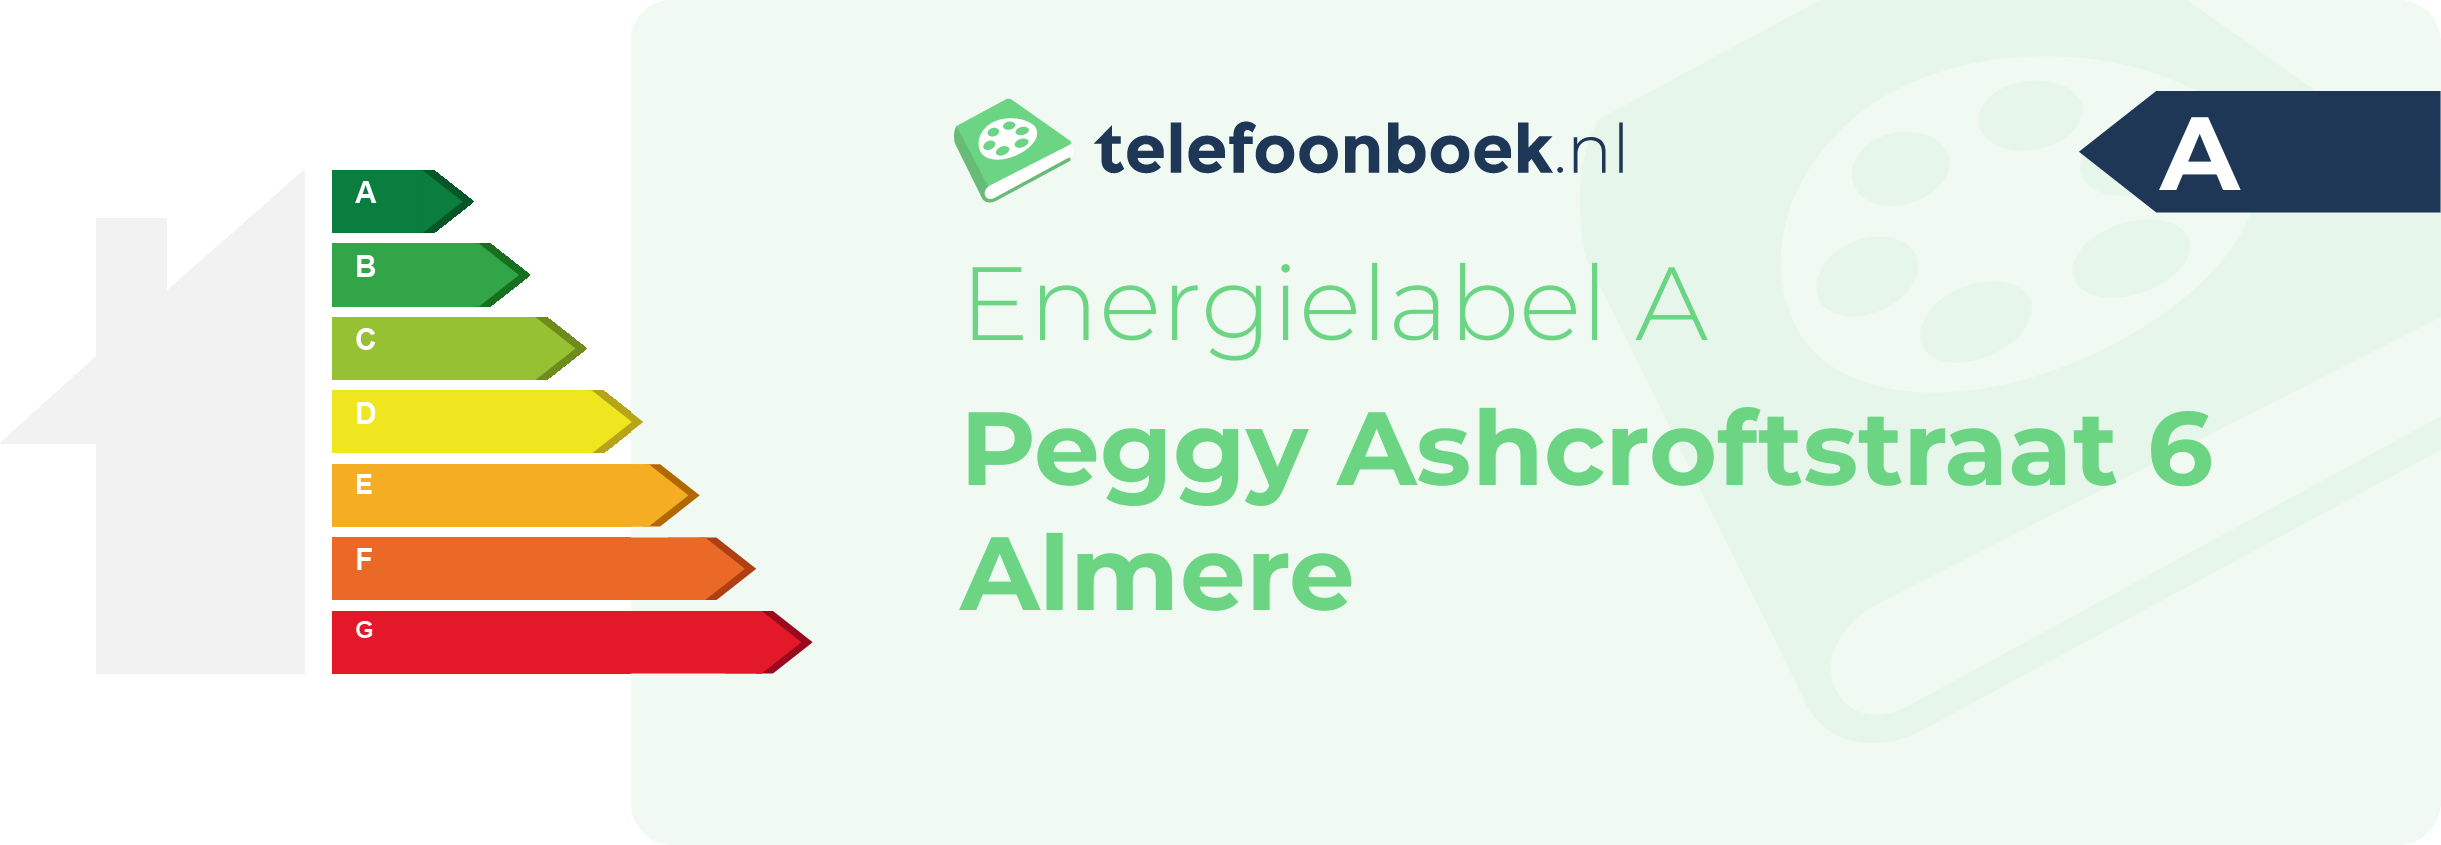 Energielabel Peggy Ashcroftstraat 6 Almere